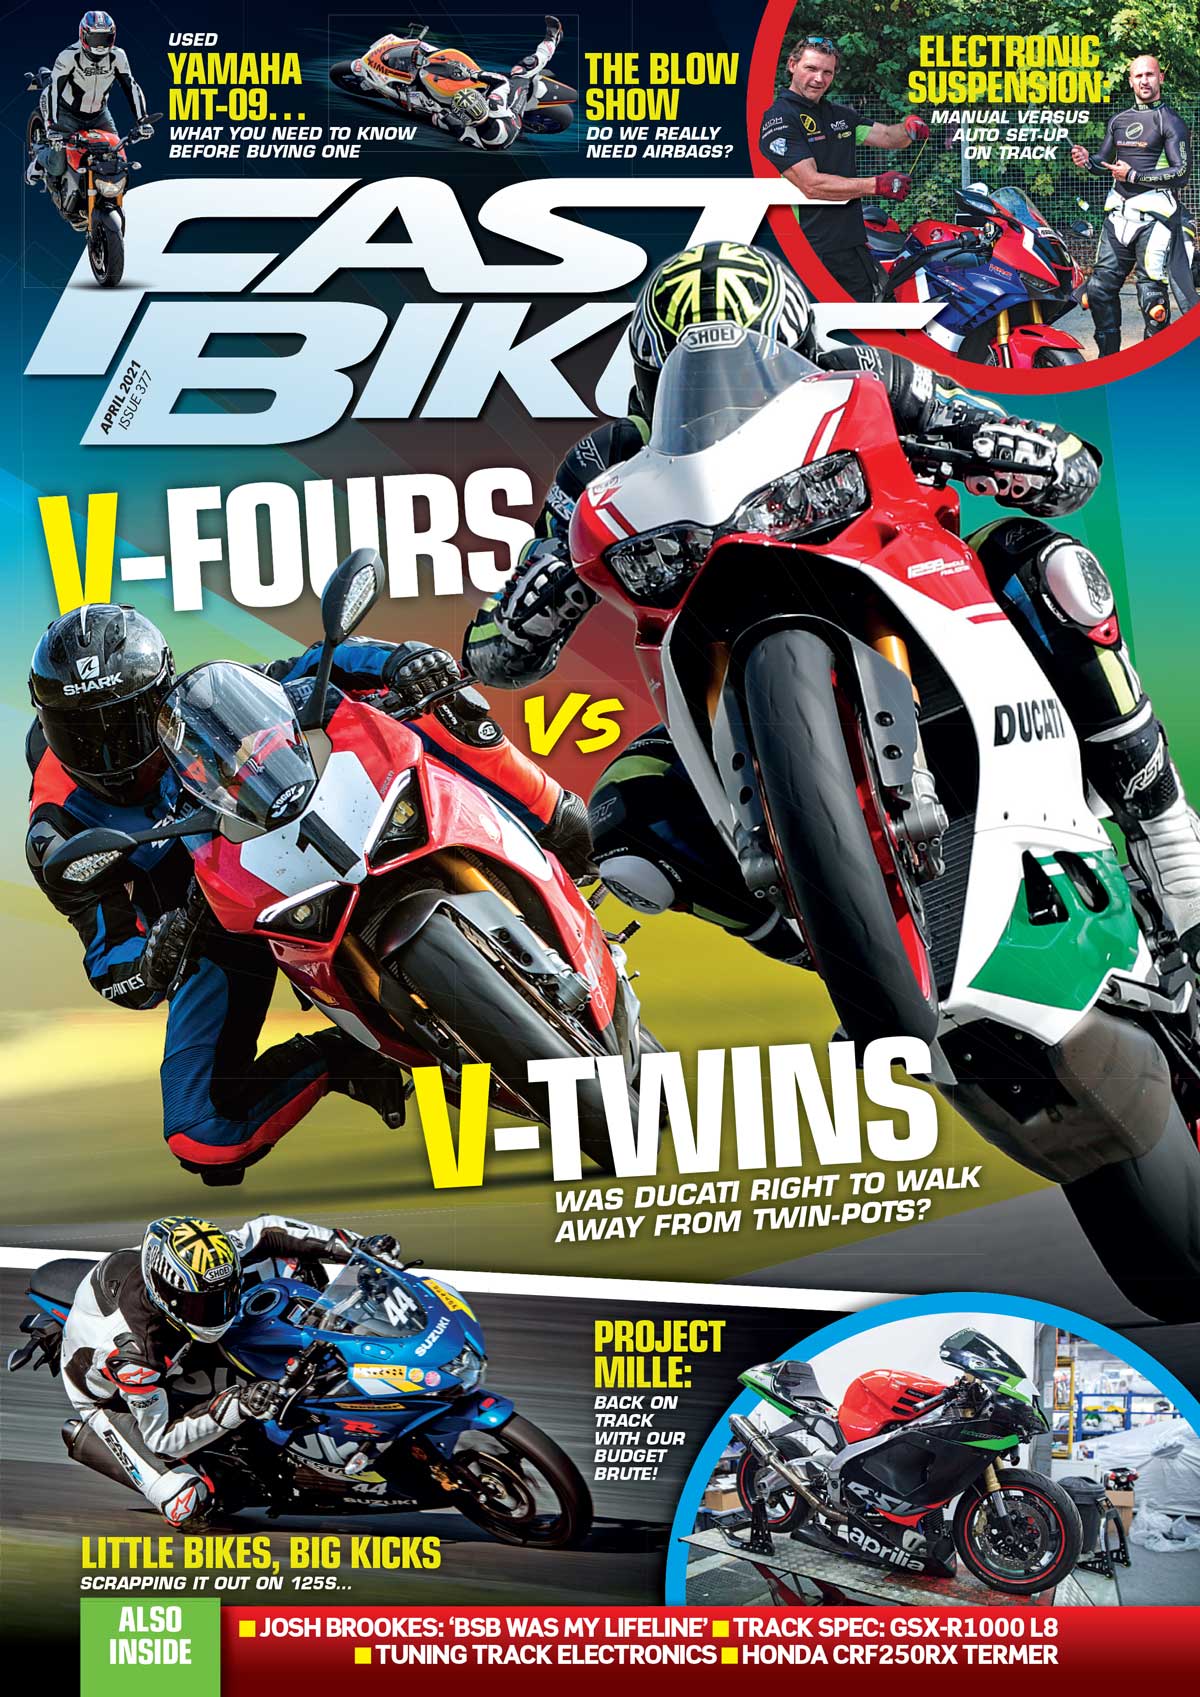 PREVIEW: April issue of Fast Bikes magazine